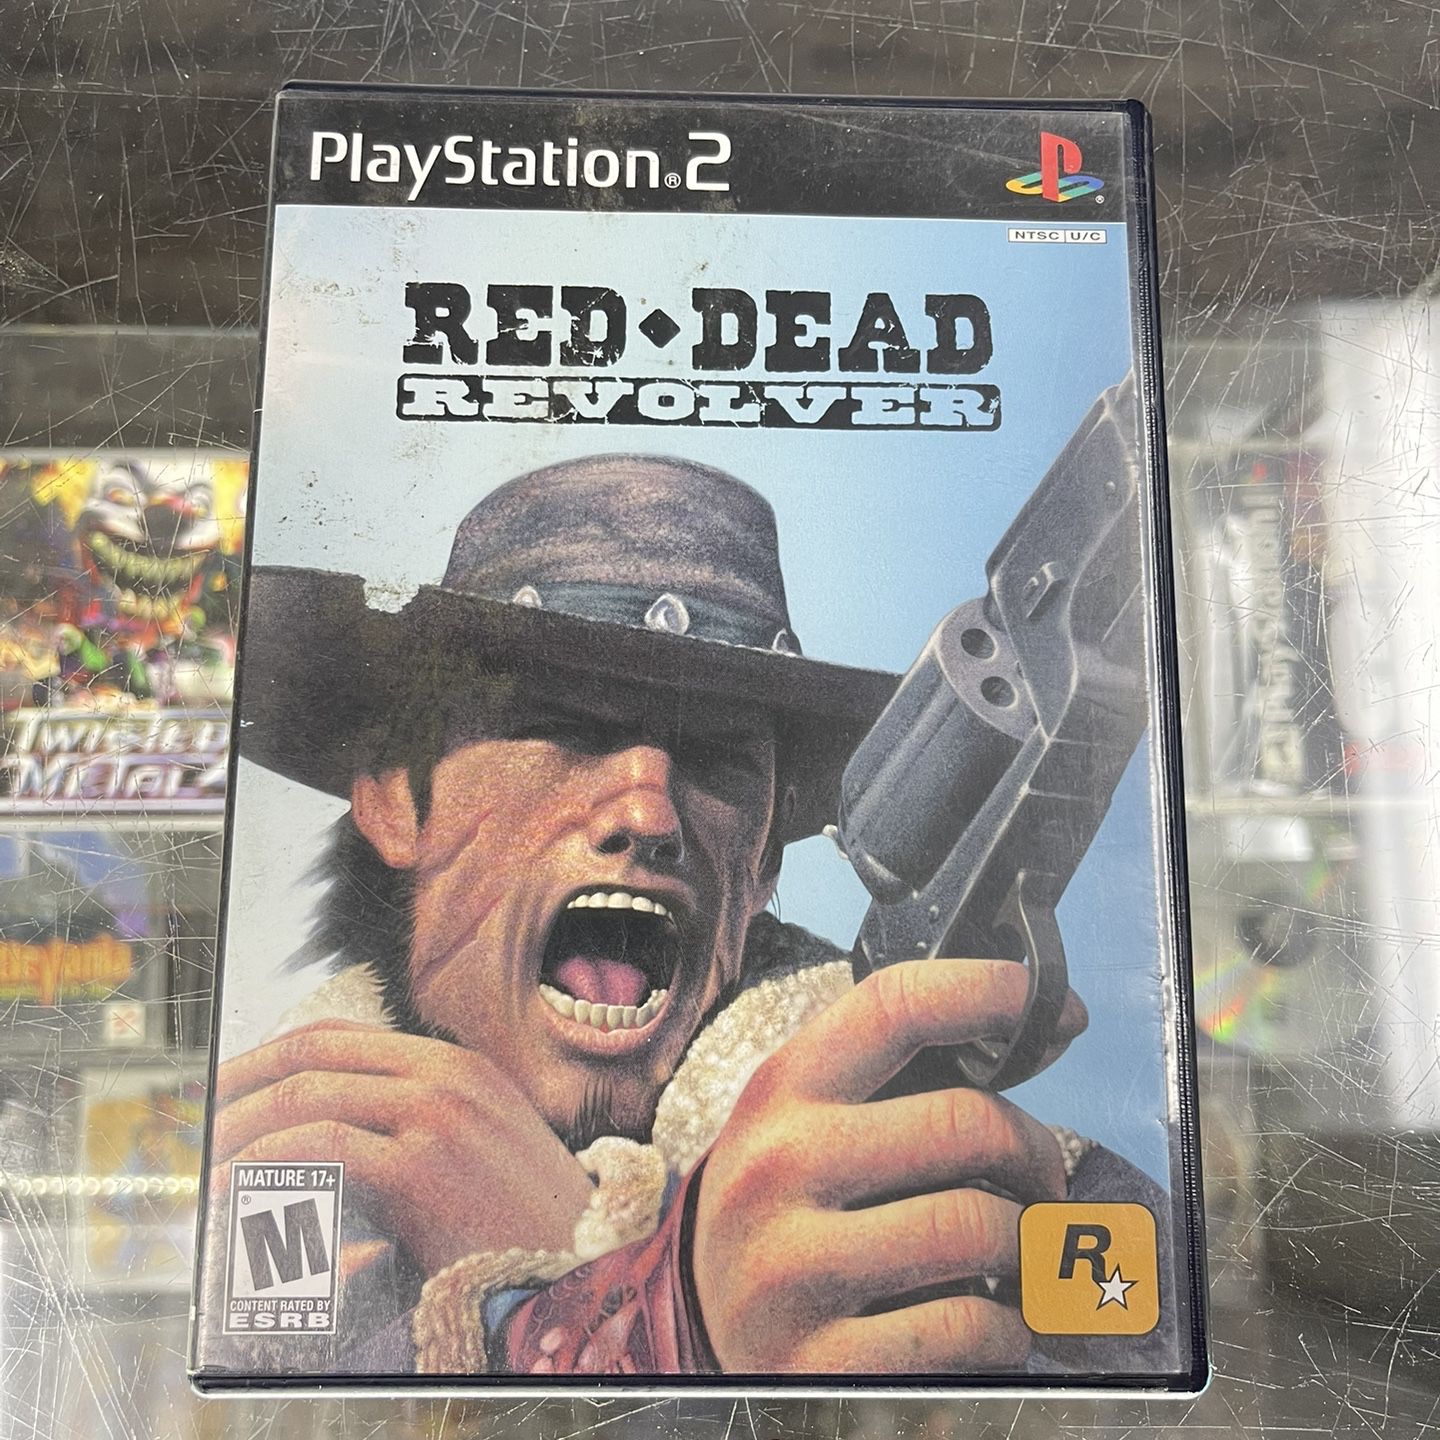 Red Dead Revolver Ps2 $35 Gamehogs 11am-7pm